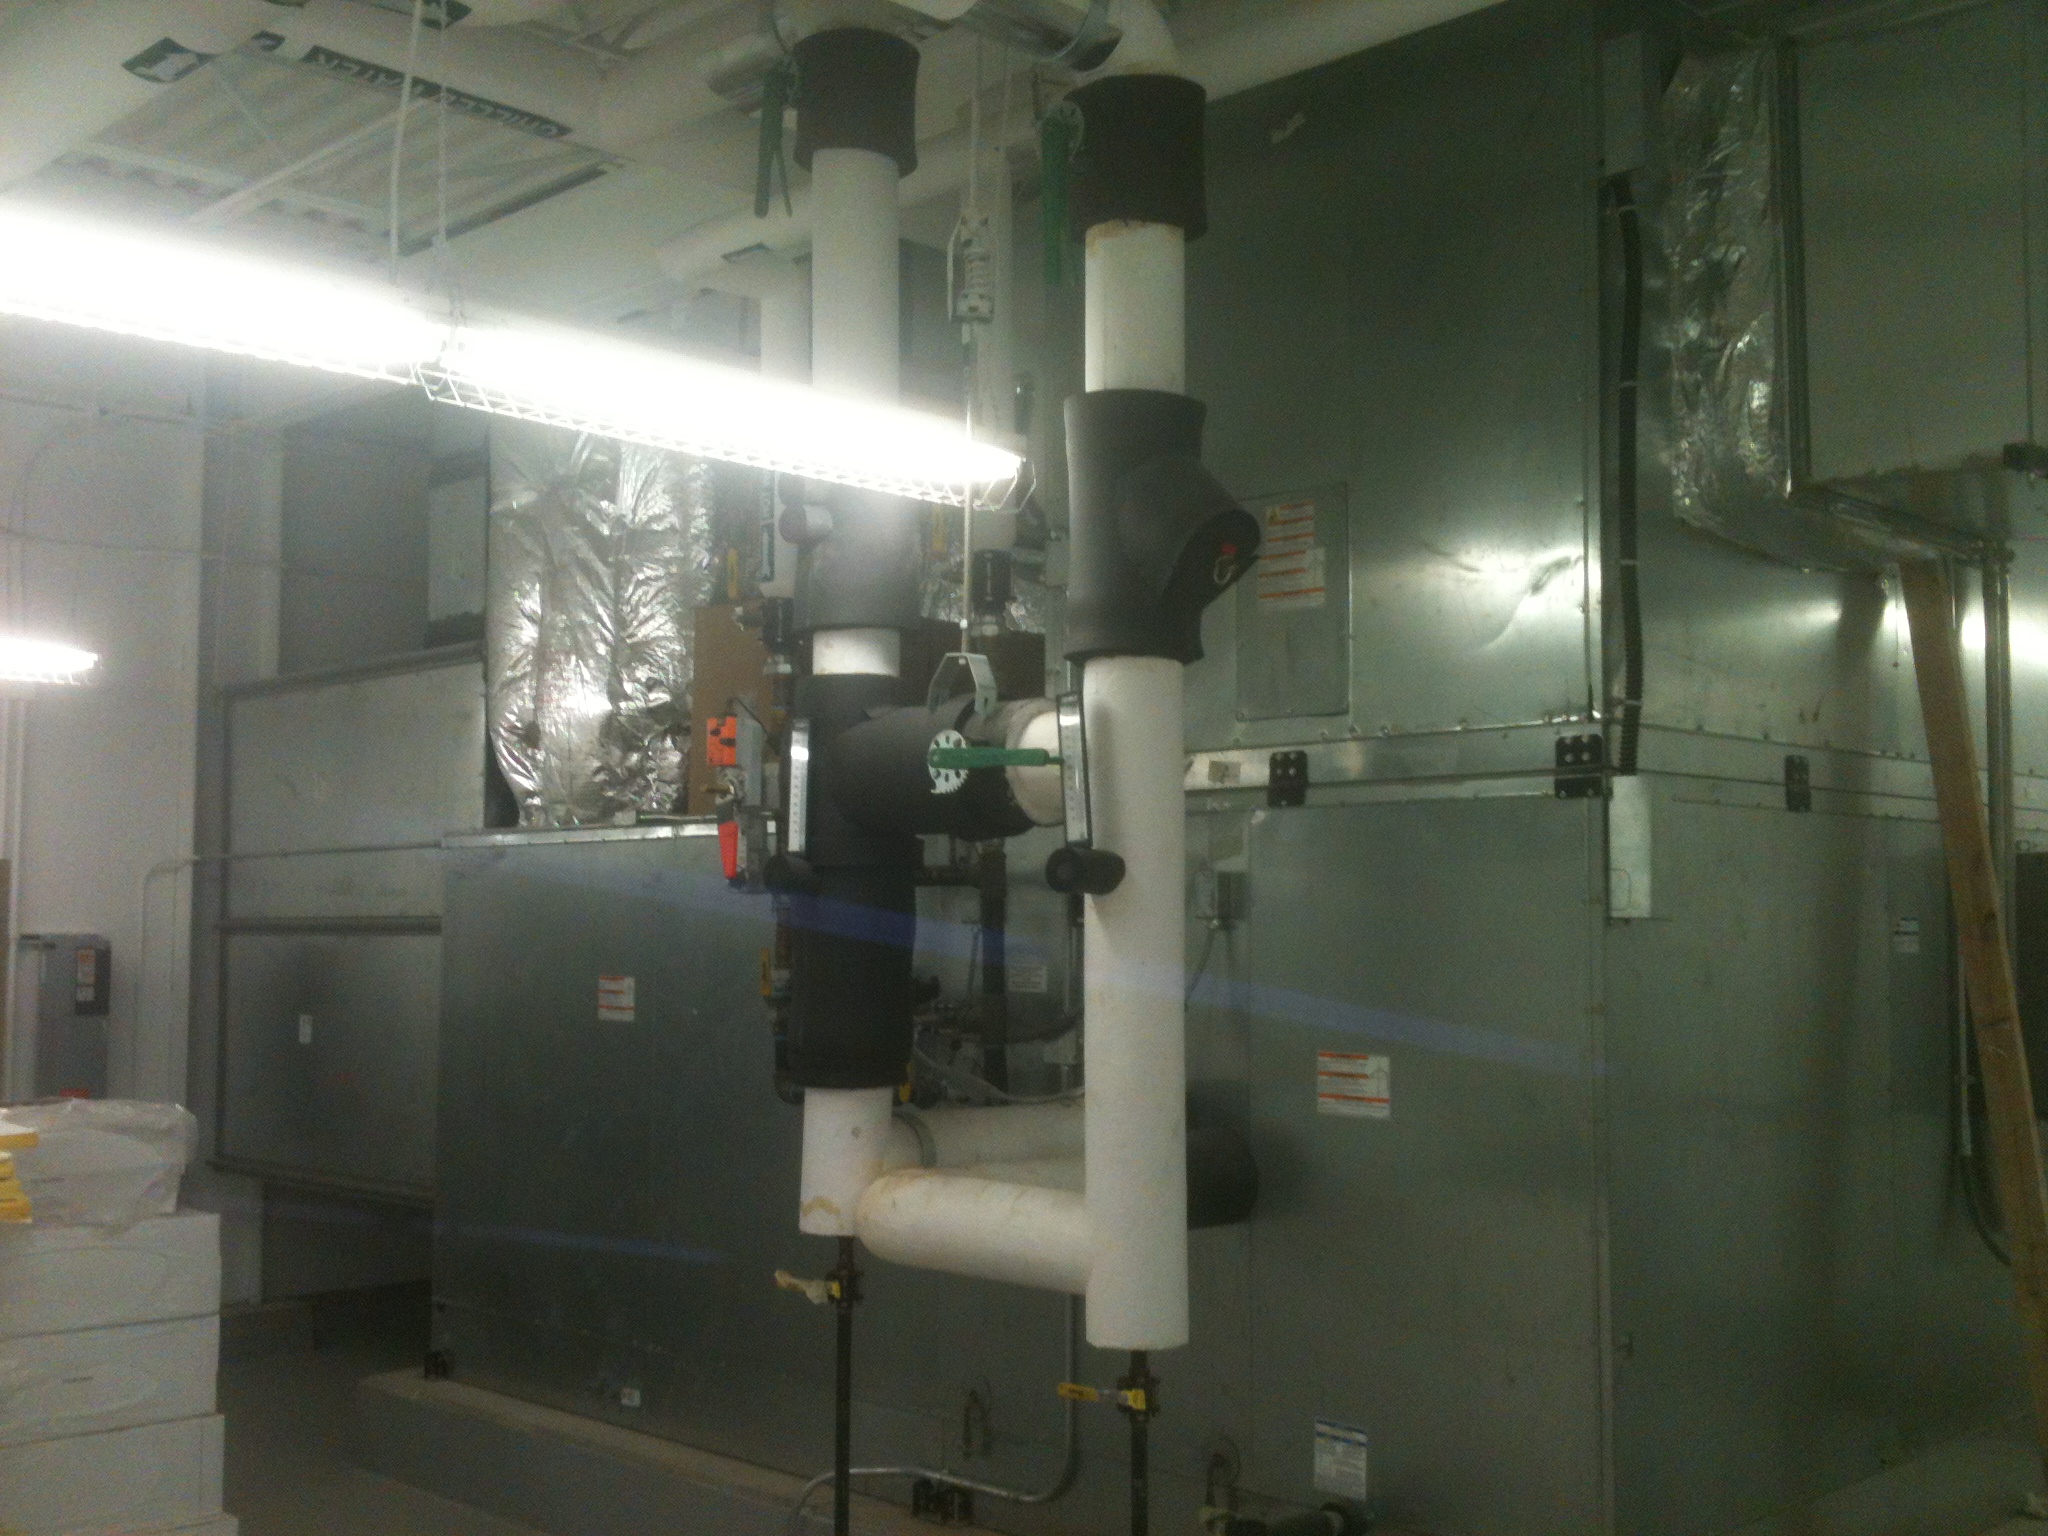 Air Handling Unit at Southwest Tennessee Community College Nursing Building